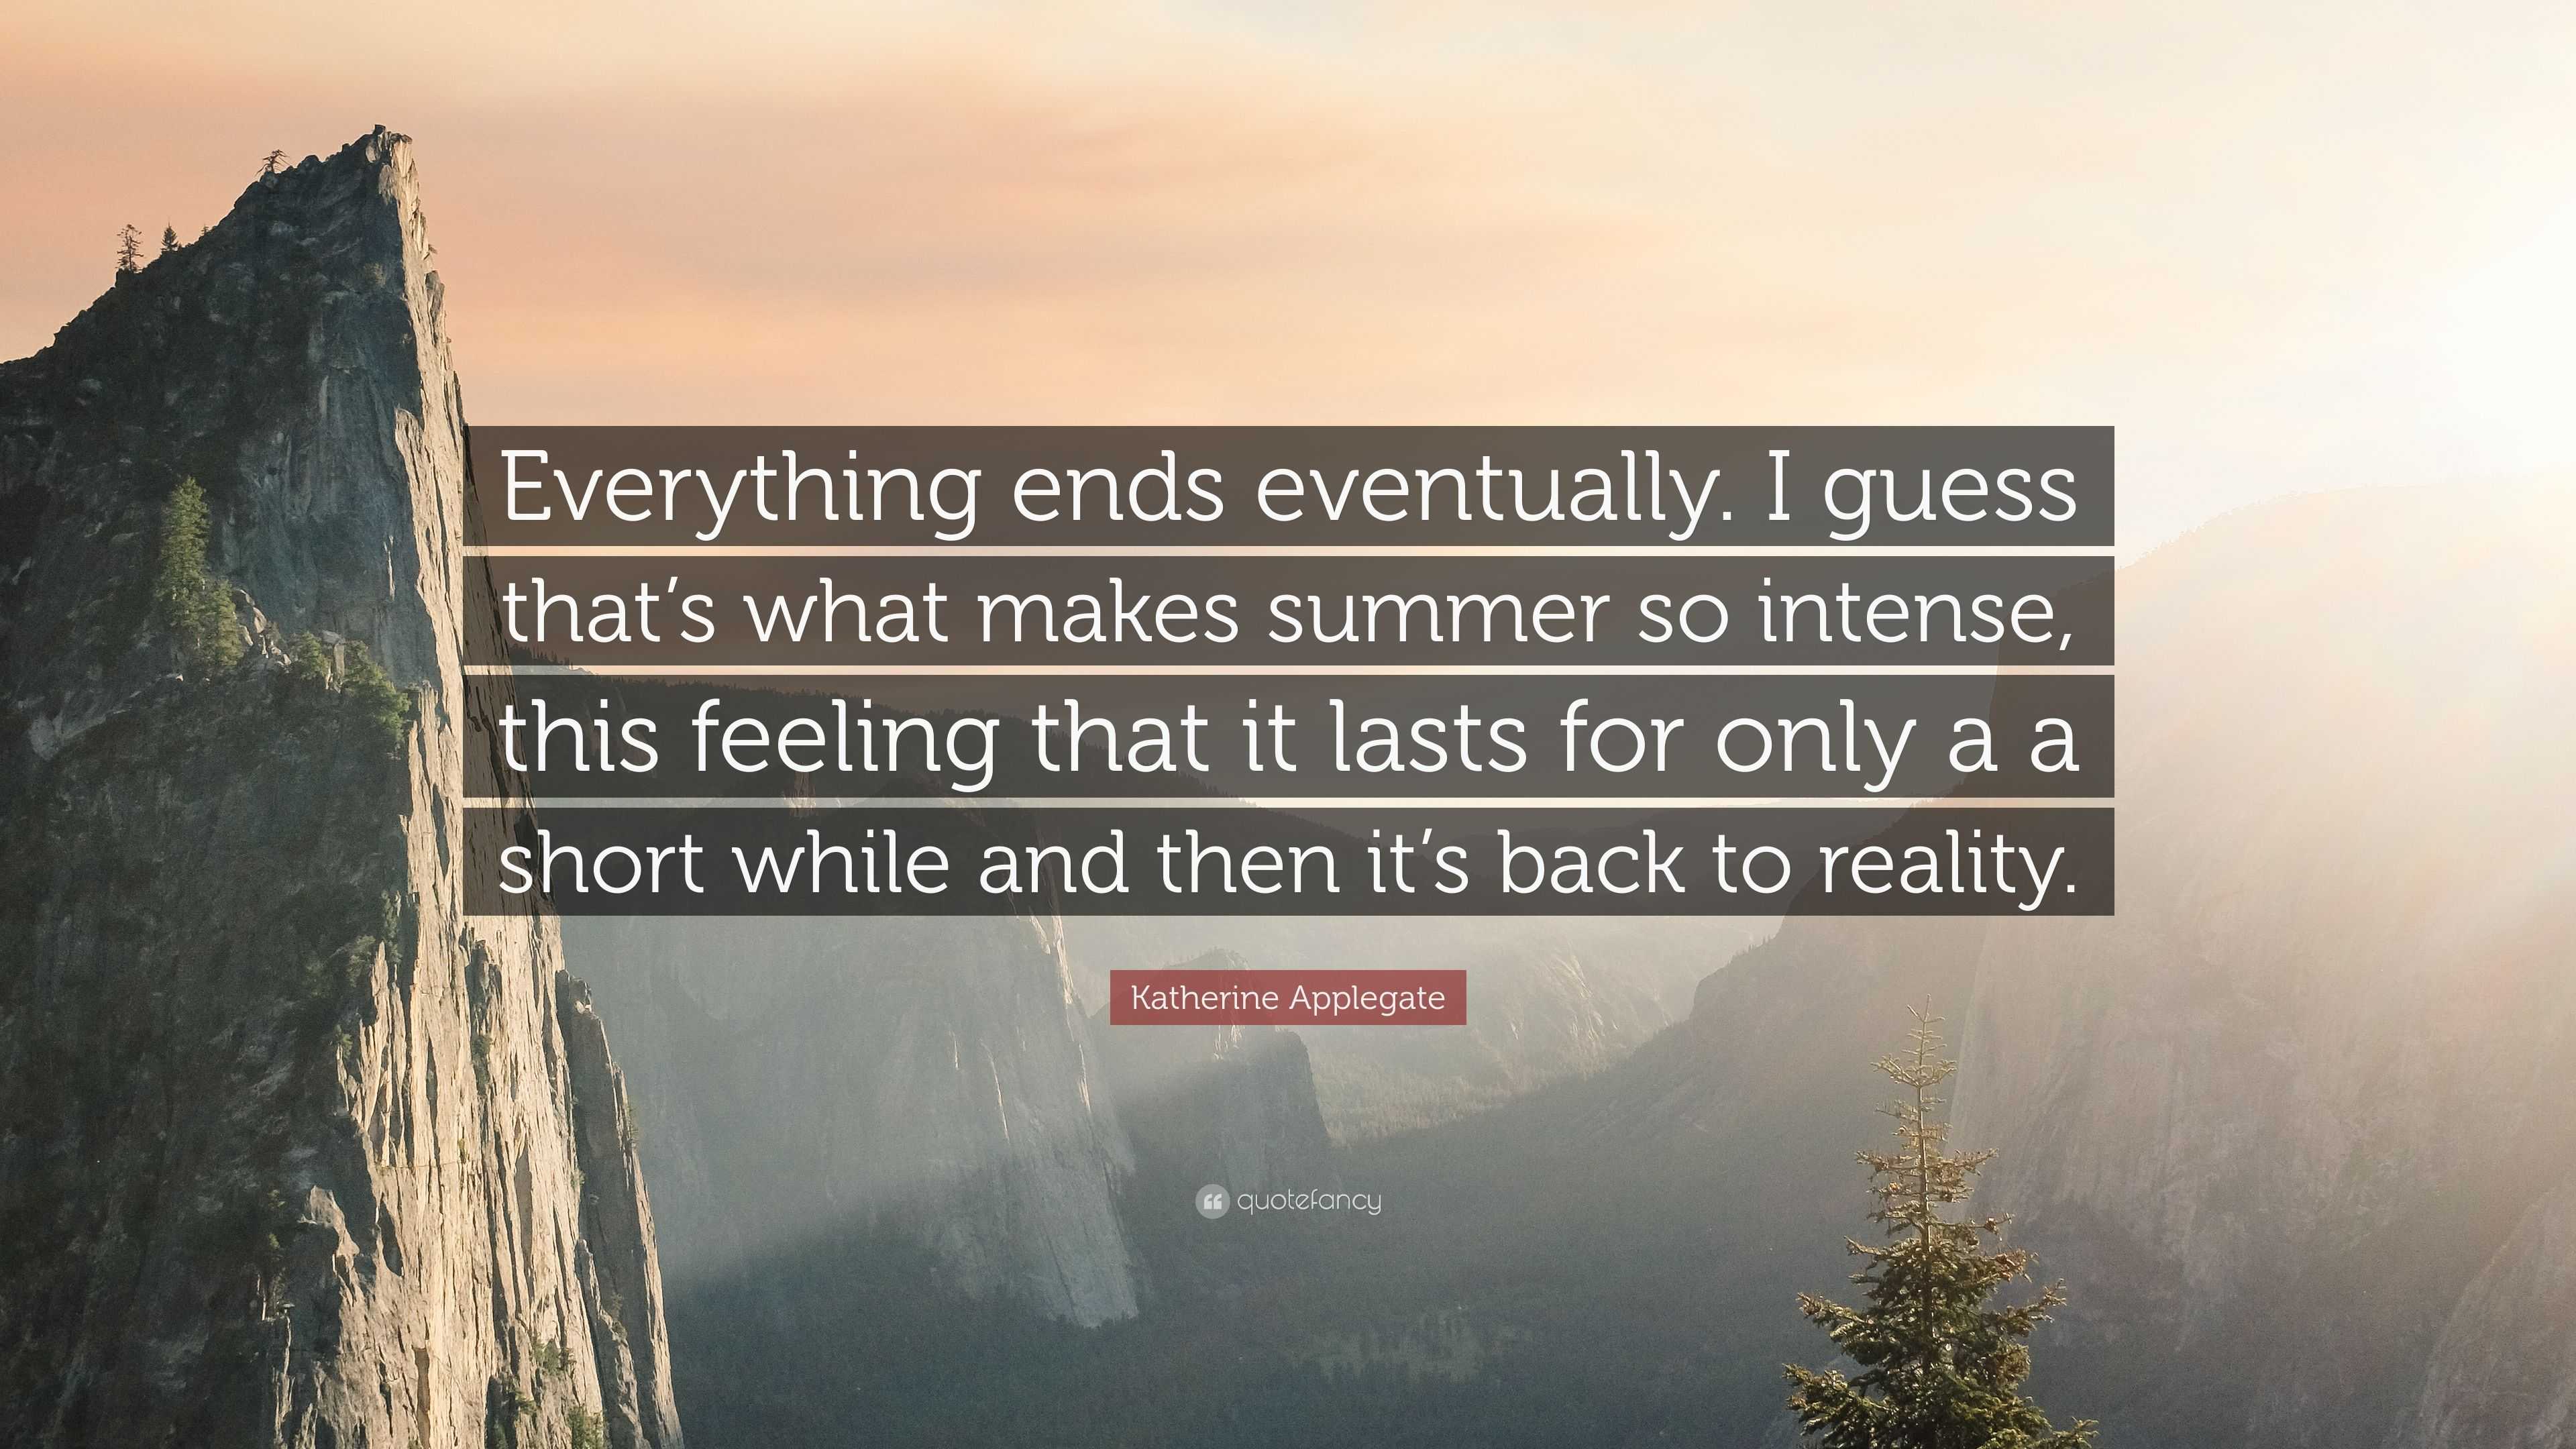 Katherine Applegate Quote: “Everything ends eventually. I guess that's what makes summer so intense, this feeling it lasts for only a